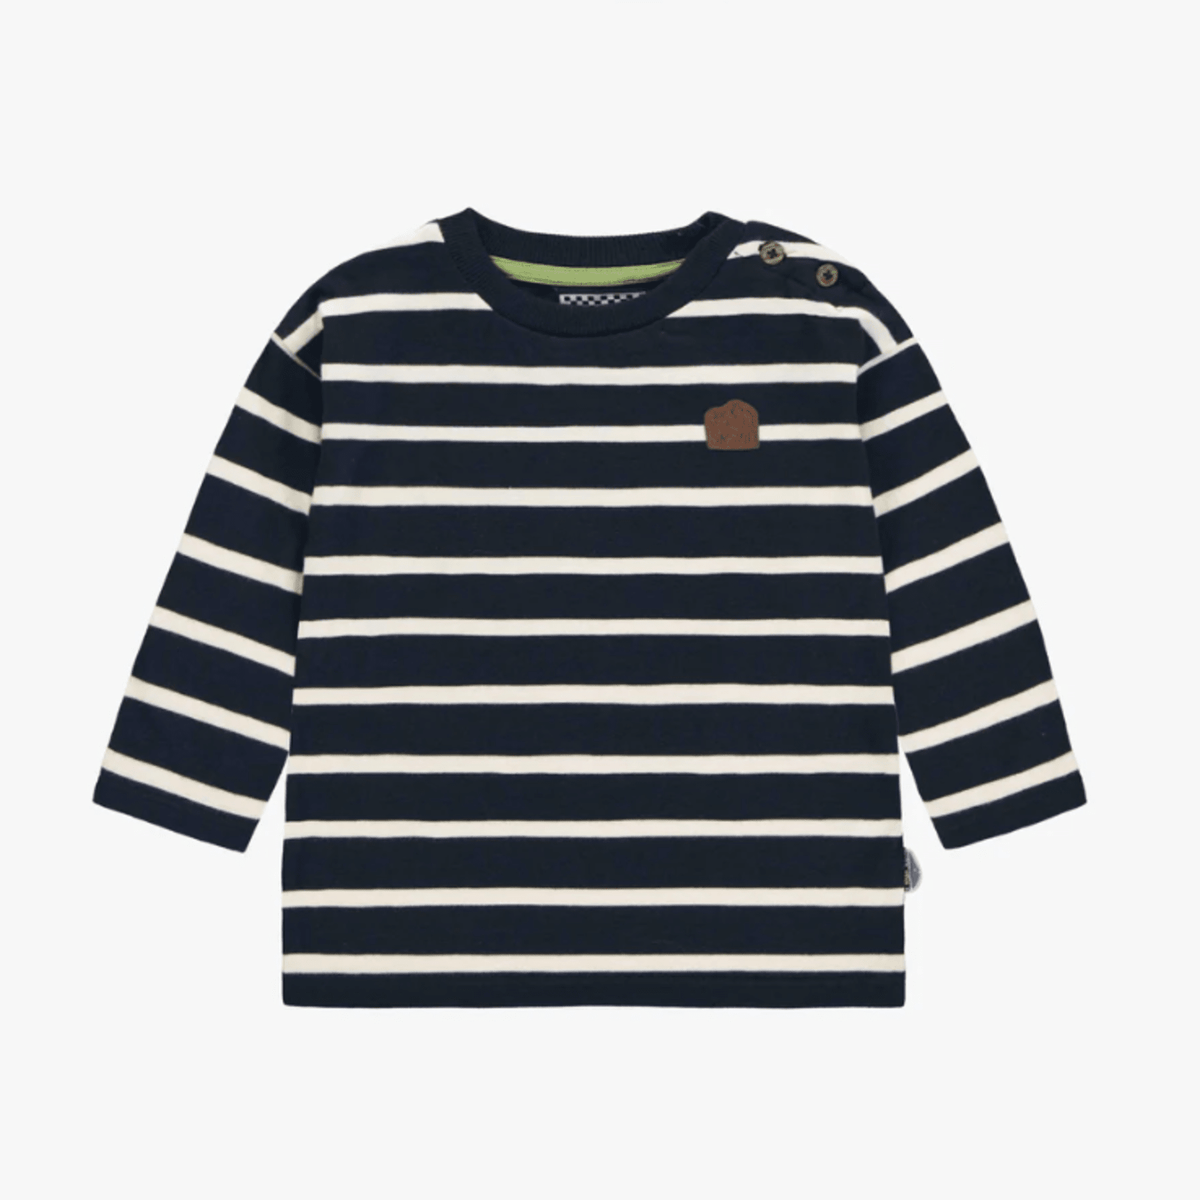 Striped Navy and Cream Long-Sleeve Shirt, Baby